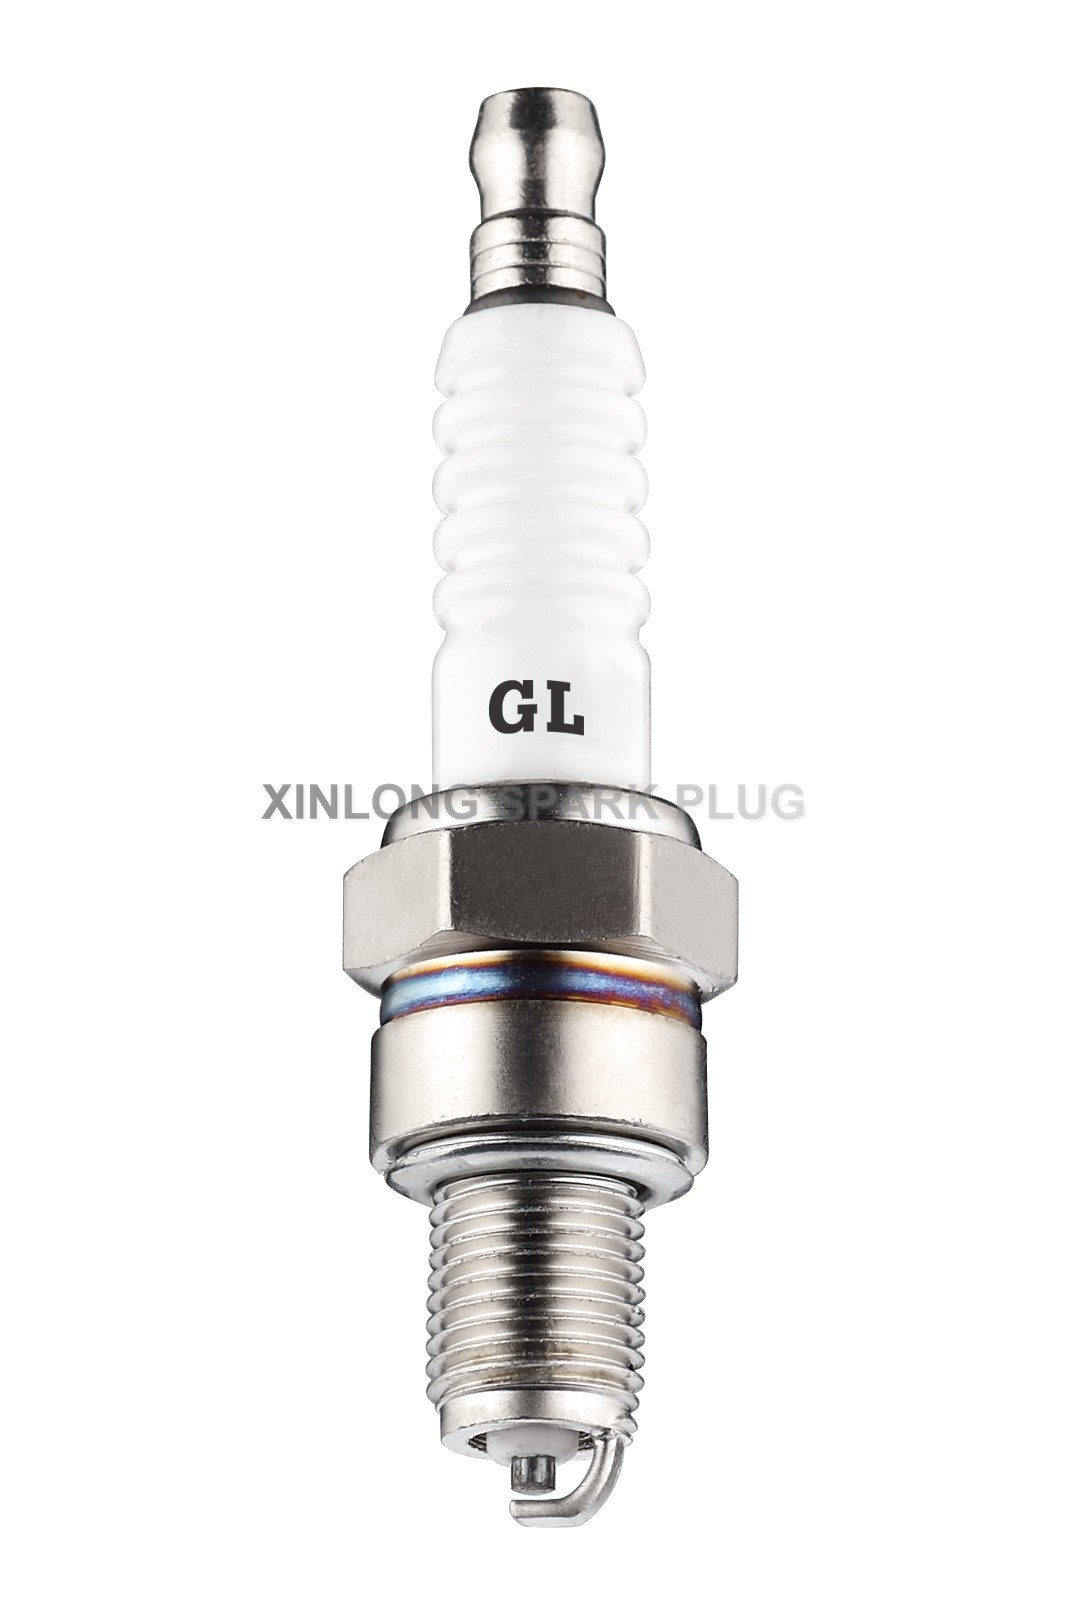 C7hsa First Class High Quality Motorcycle Spark Plug Low Price with High Quality